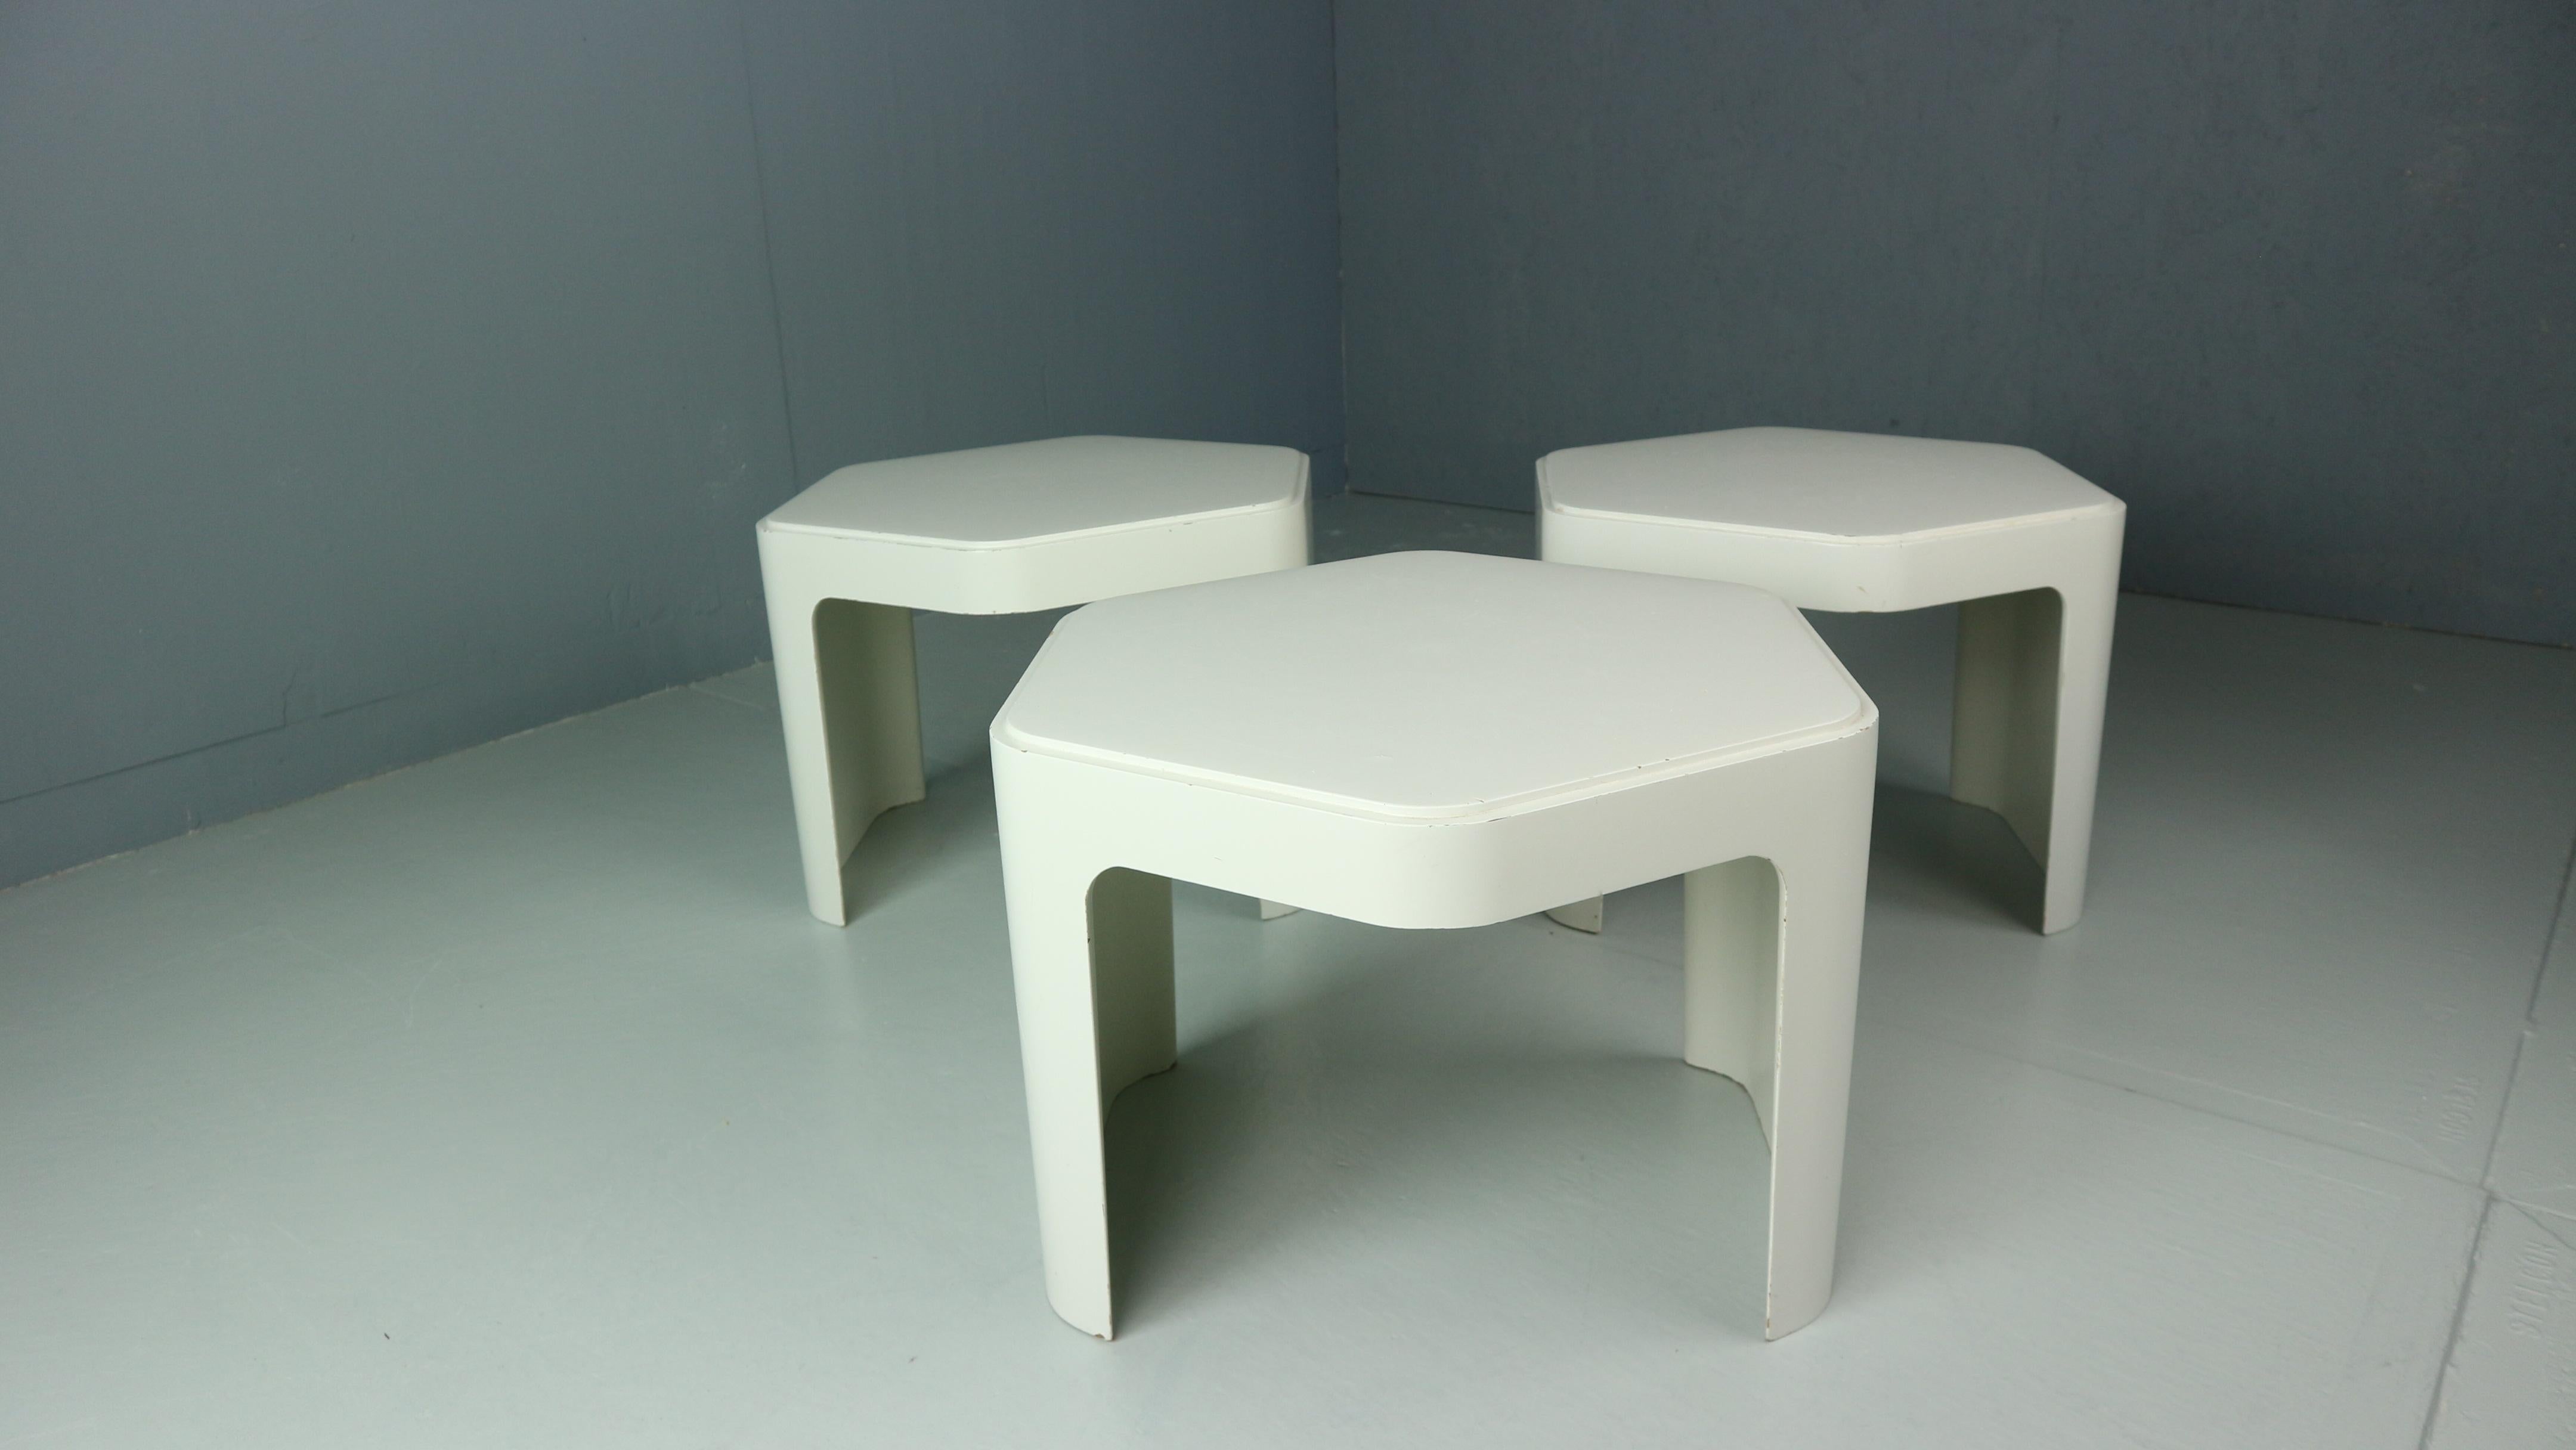 German 3x Hexagonal side tables by Peter Ghyzcy for Form + Life Collection, 1970.